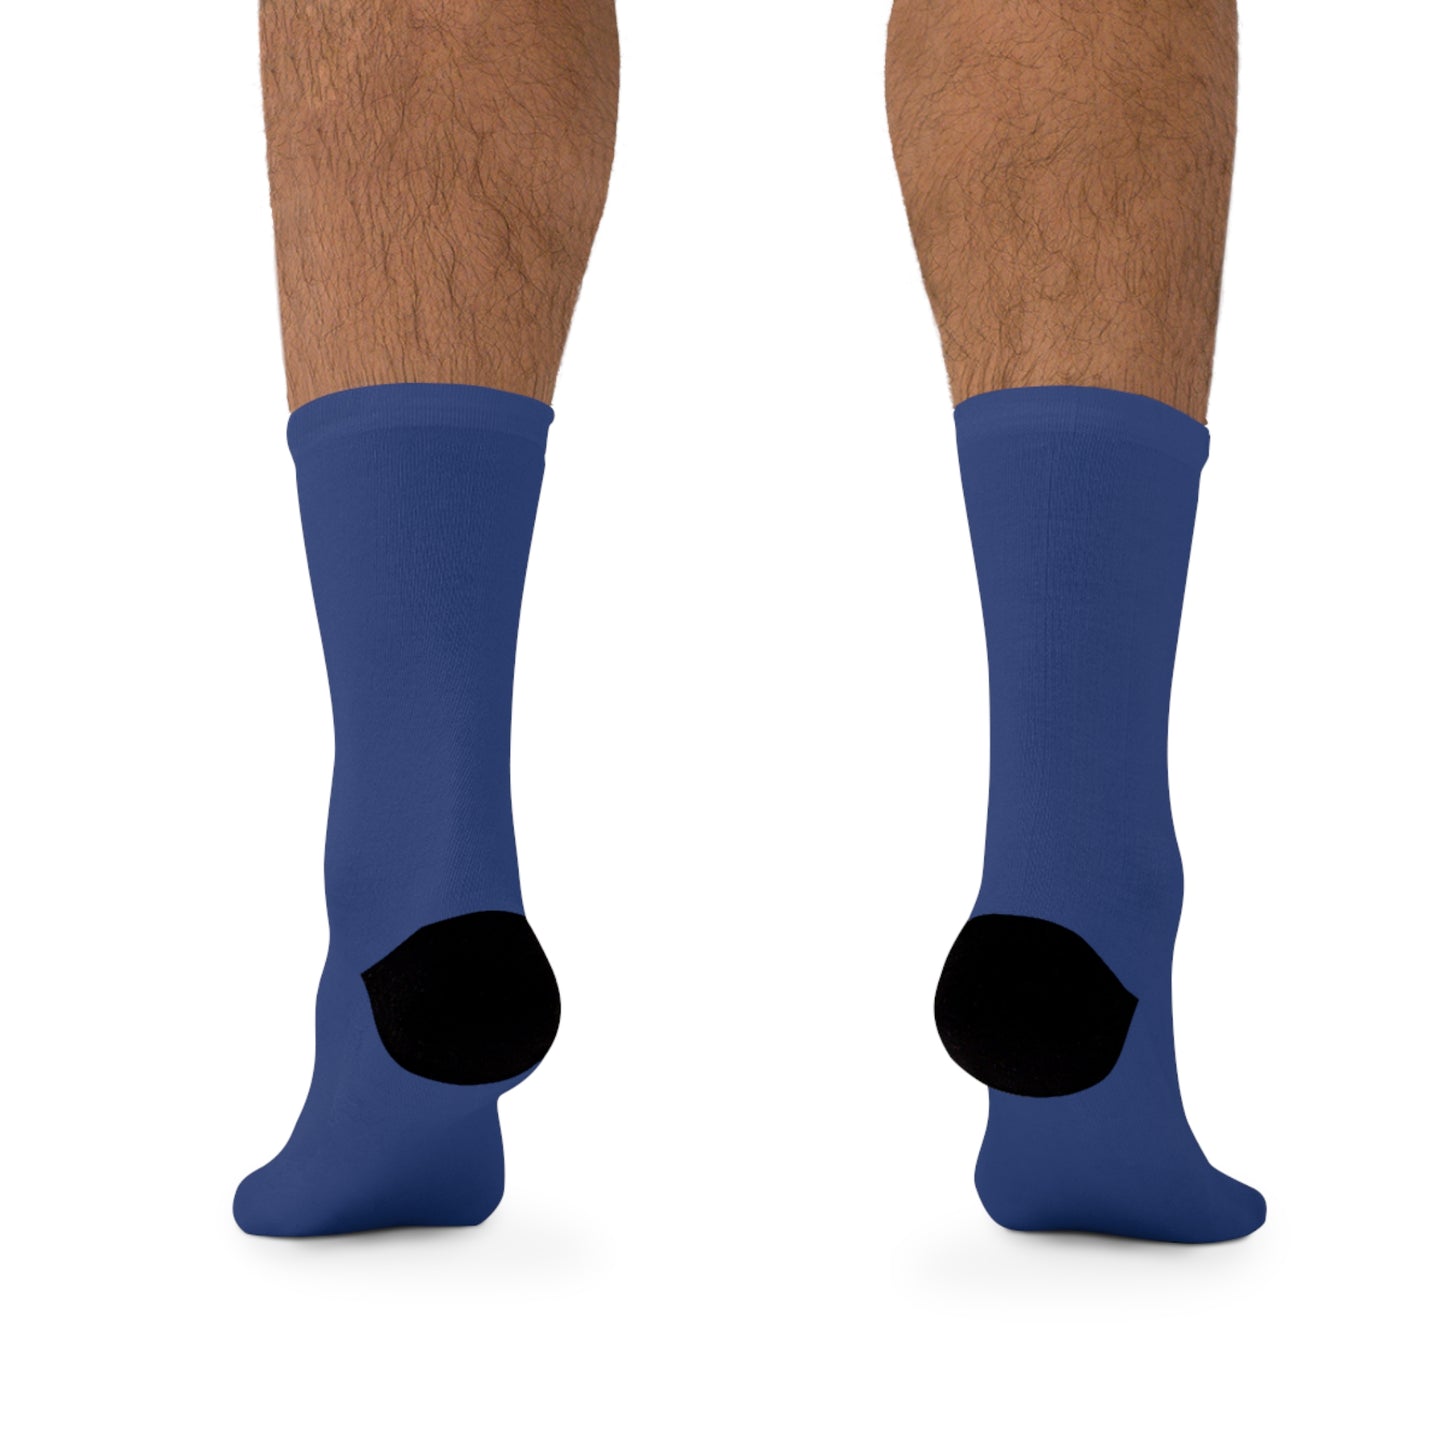 "FOOTCOVERS" Recycled Poly Socks - Cobalt Blue